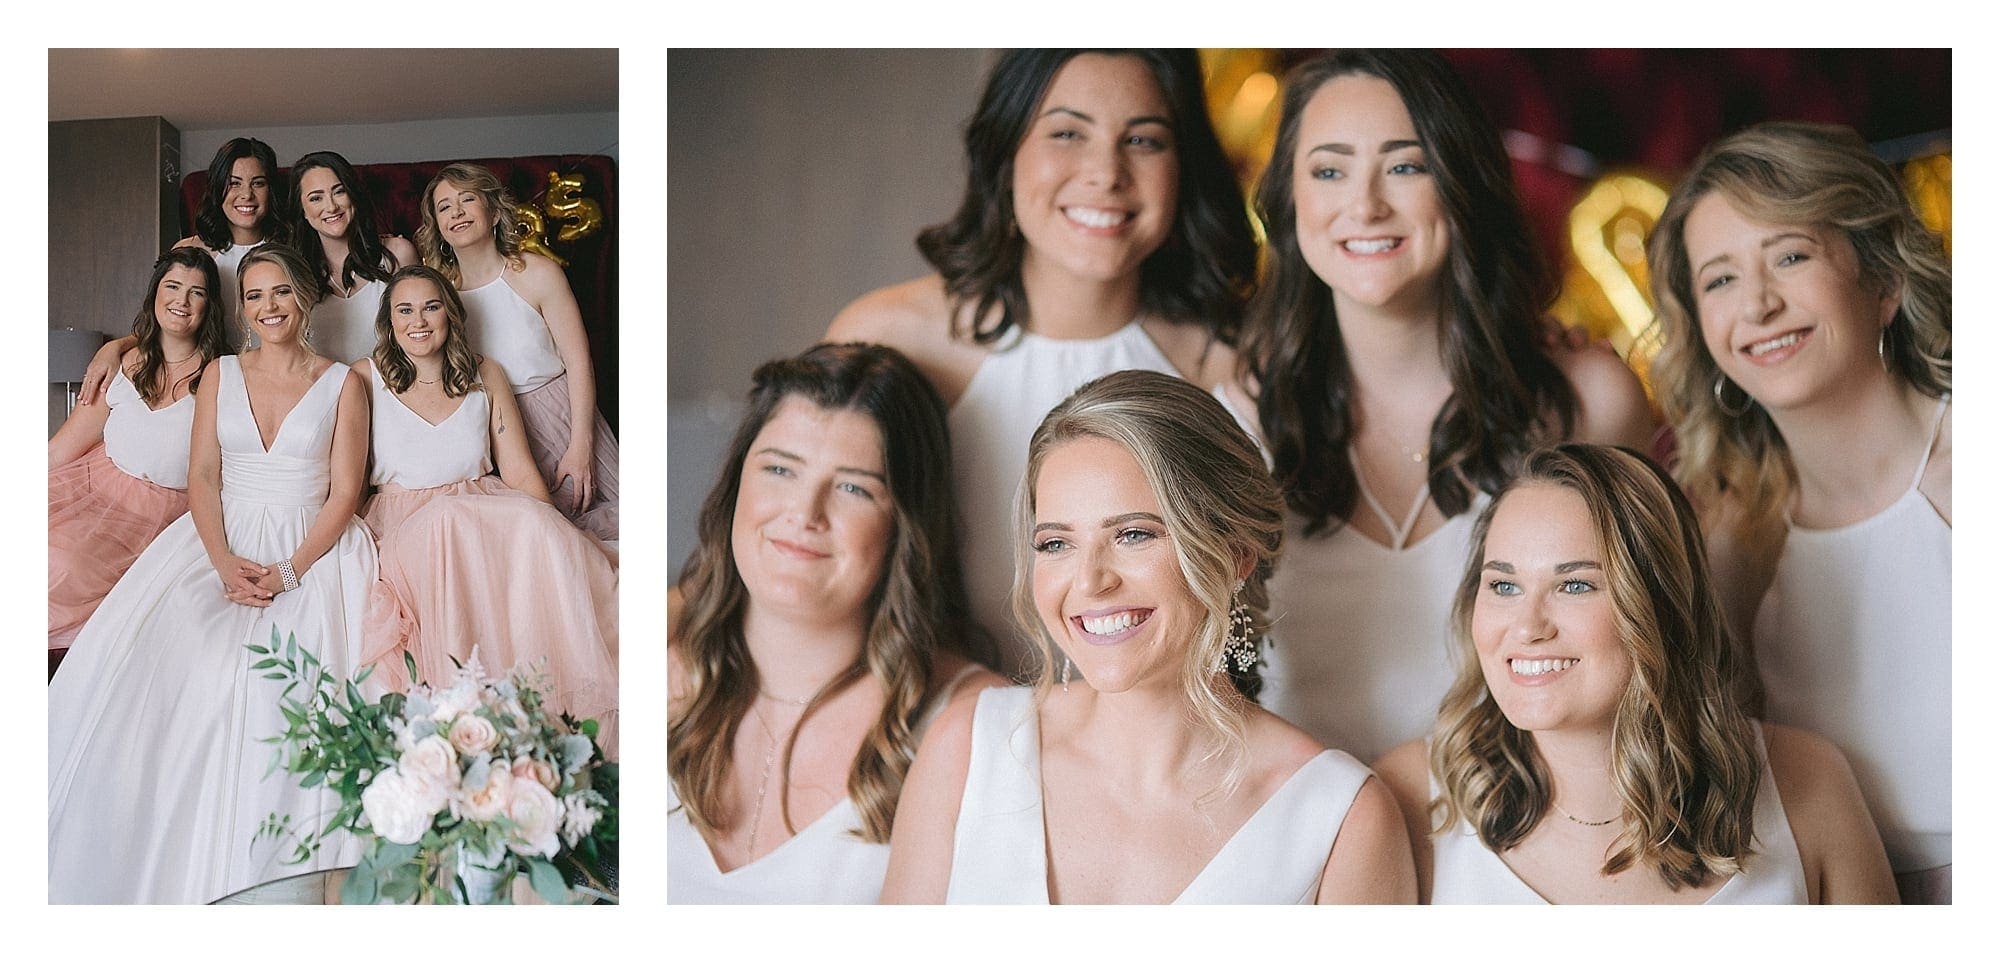 Bride and her bridesmaids smiling at camera sitting on couch